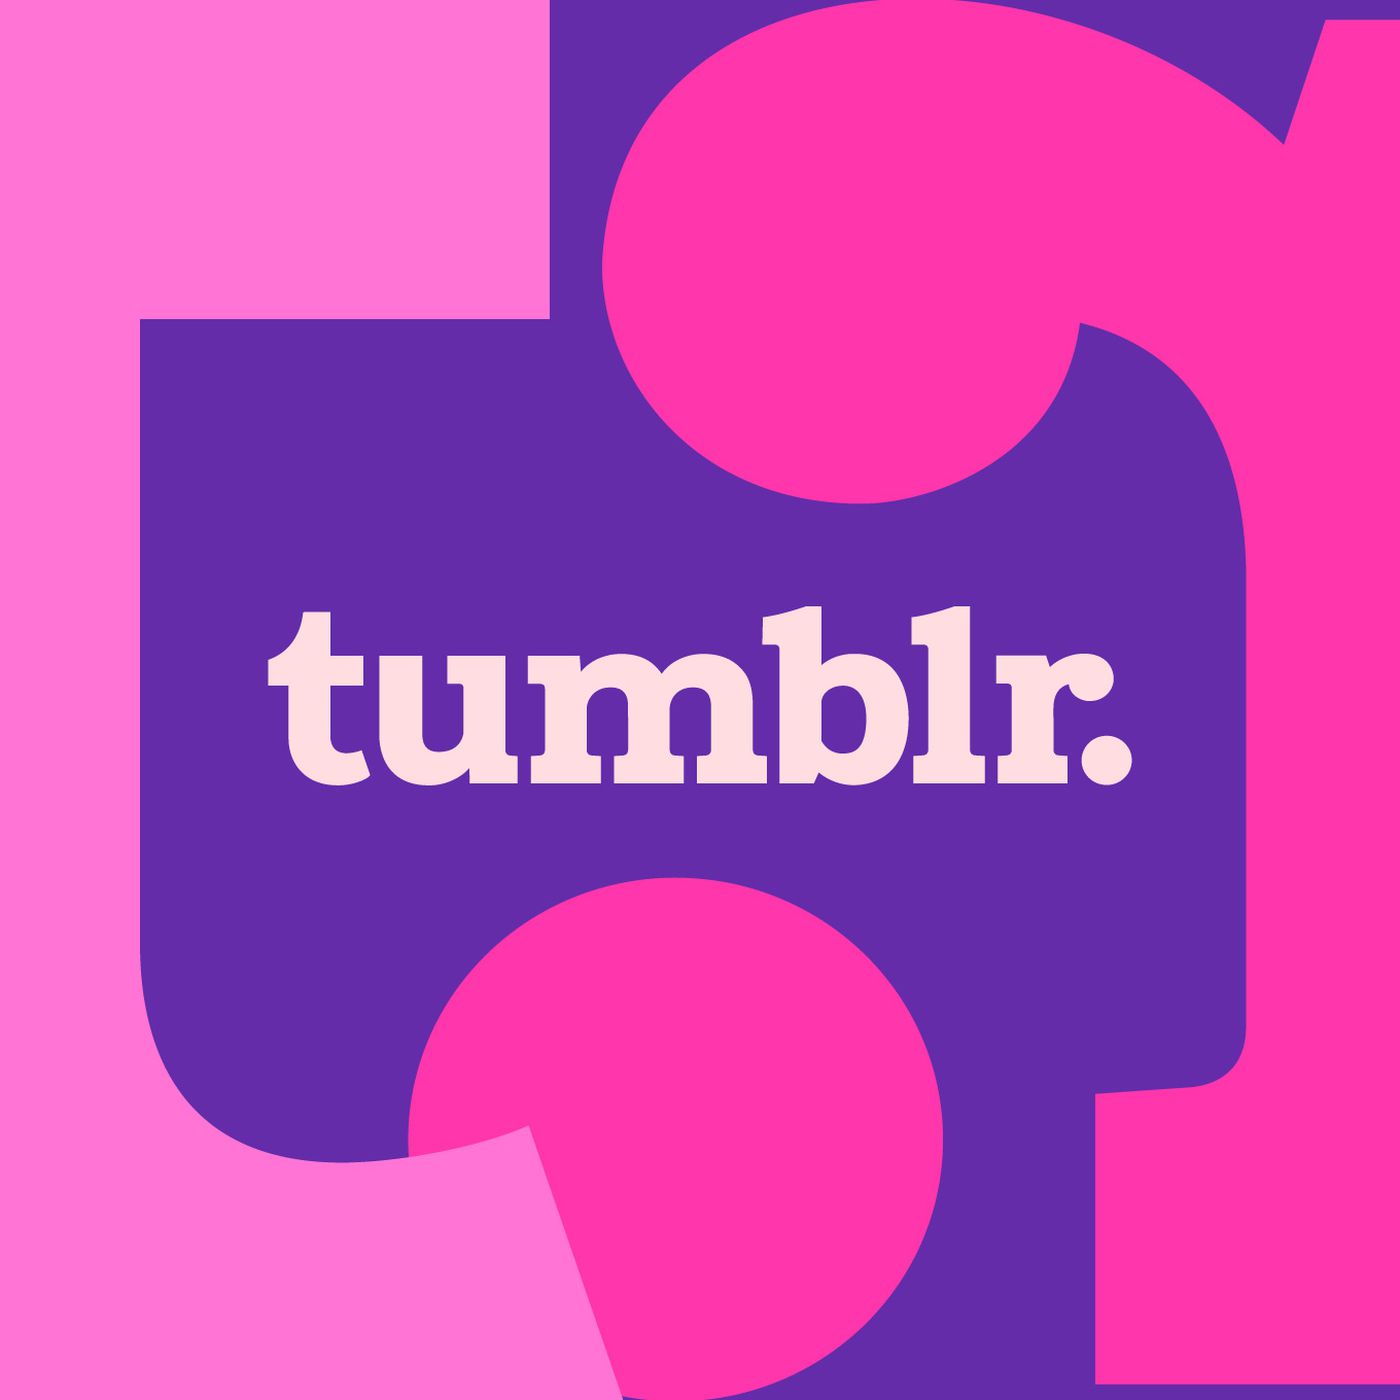 debbie caudill recommends nudity on tumblr pic